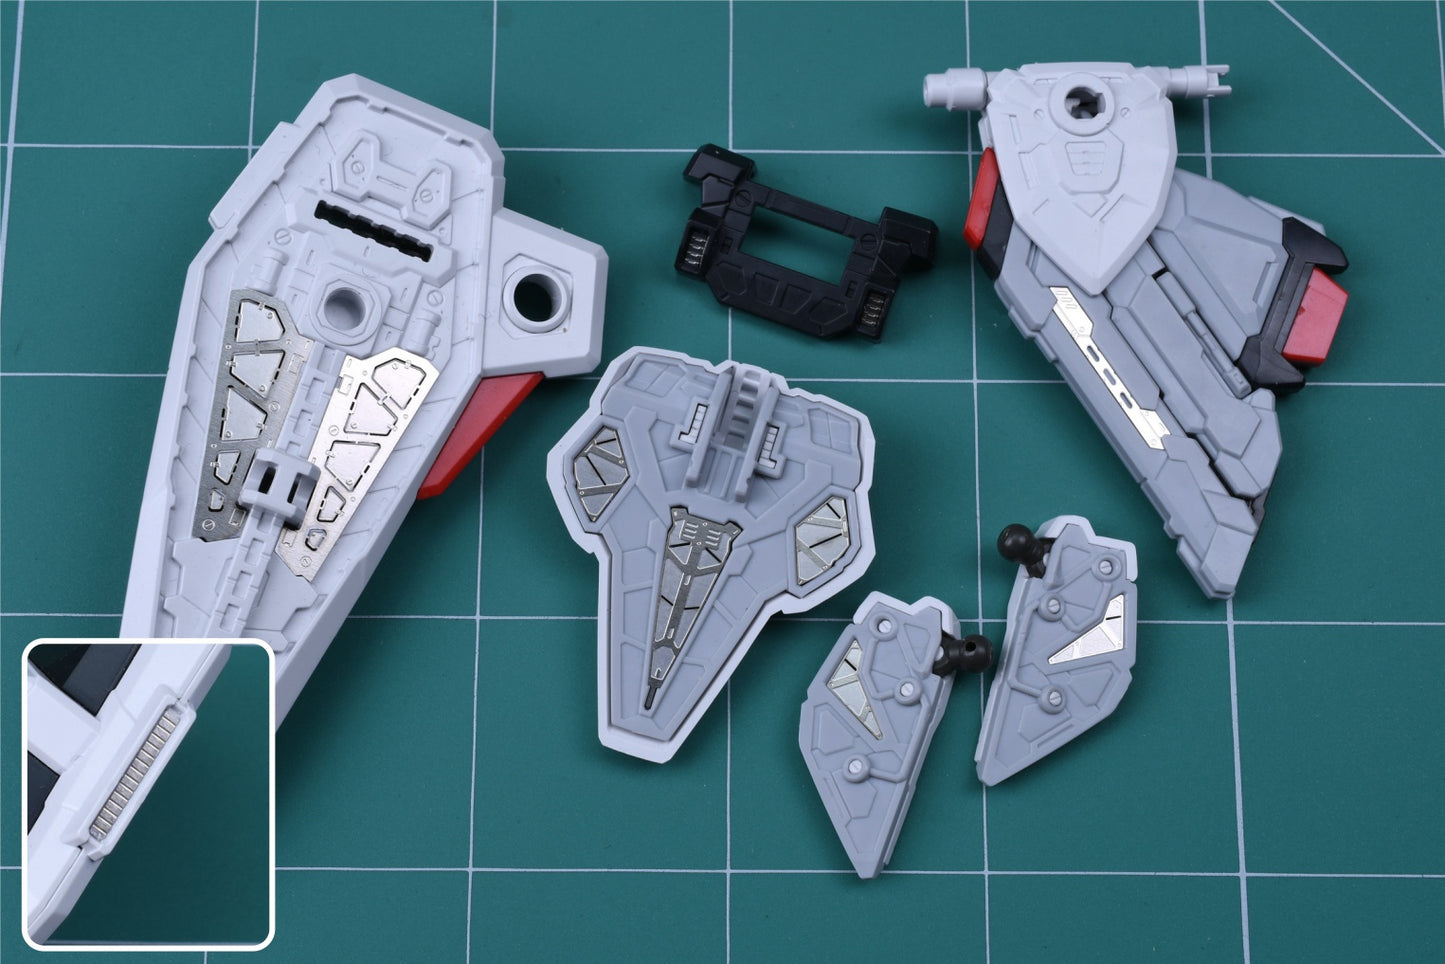 Madworks S048 Etching Parts for MGSD ZGMF-X10A Freedom Gundam